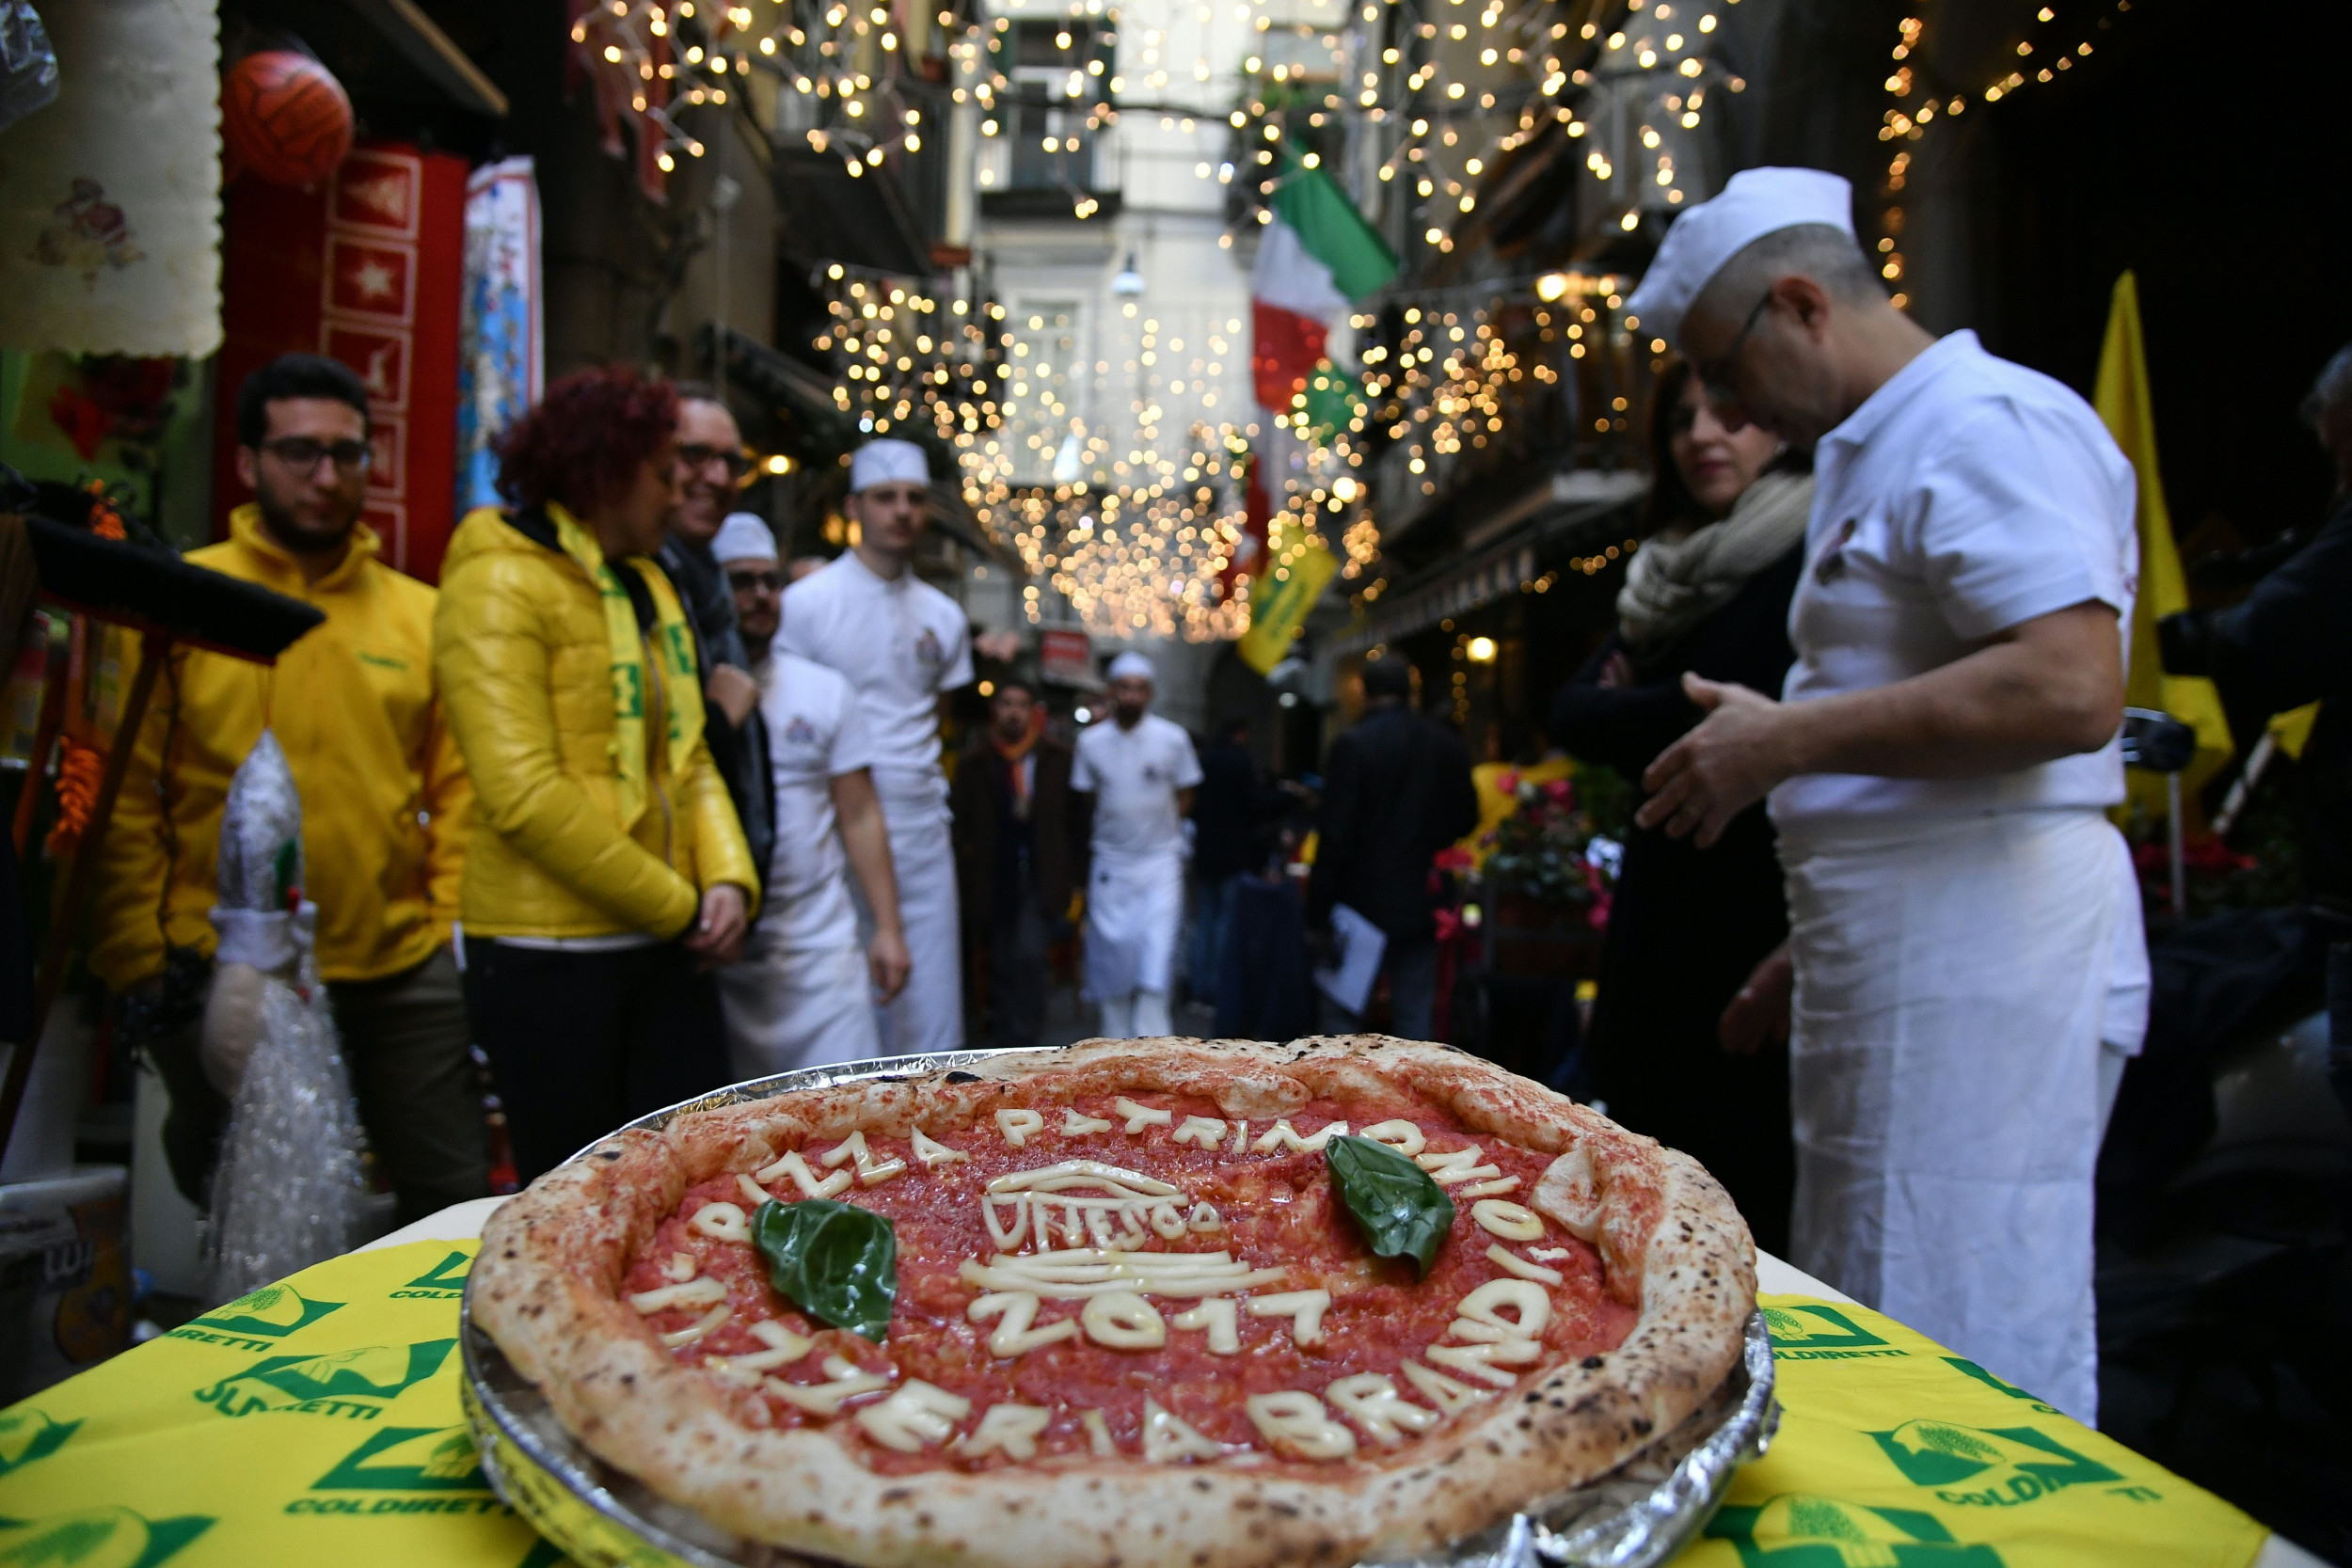 History of pizza: Google Doodle celebrates pizza from around the world